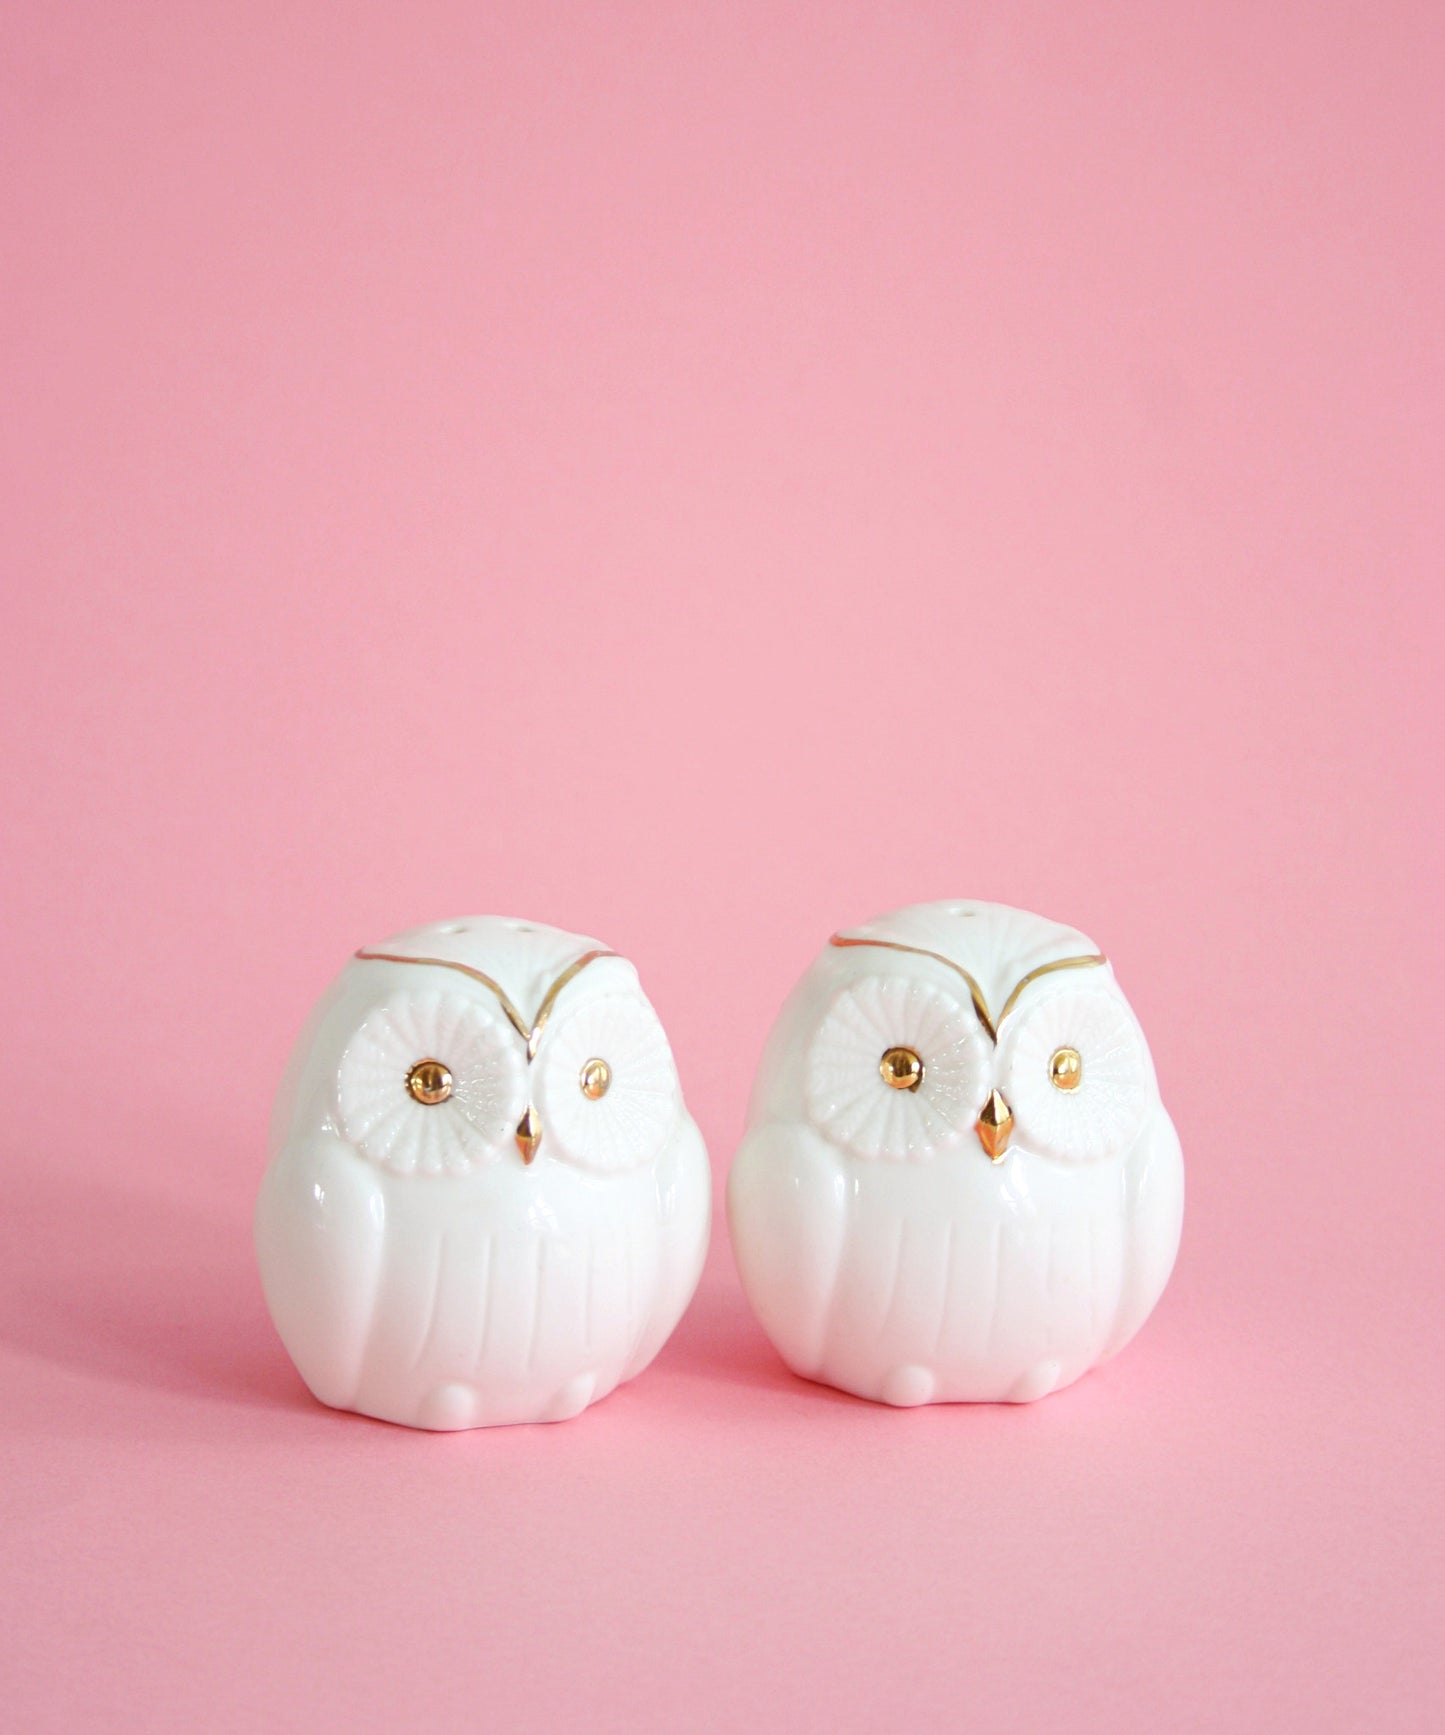 SOLD - Vintage White and Gold Ceramic Owl Salt and Pepper Shakers